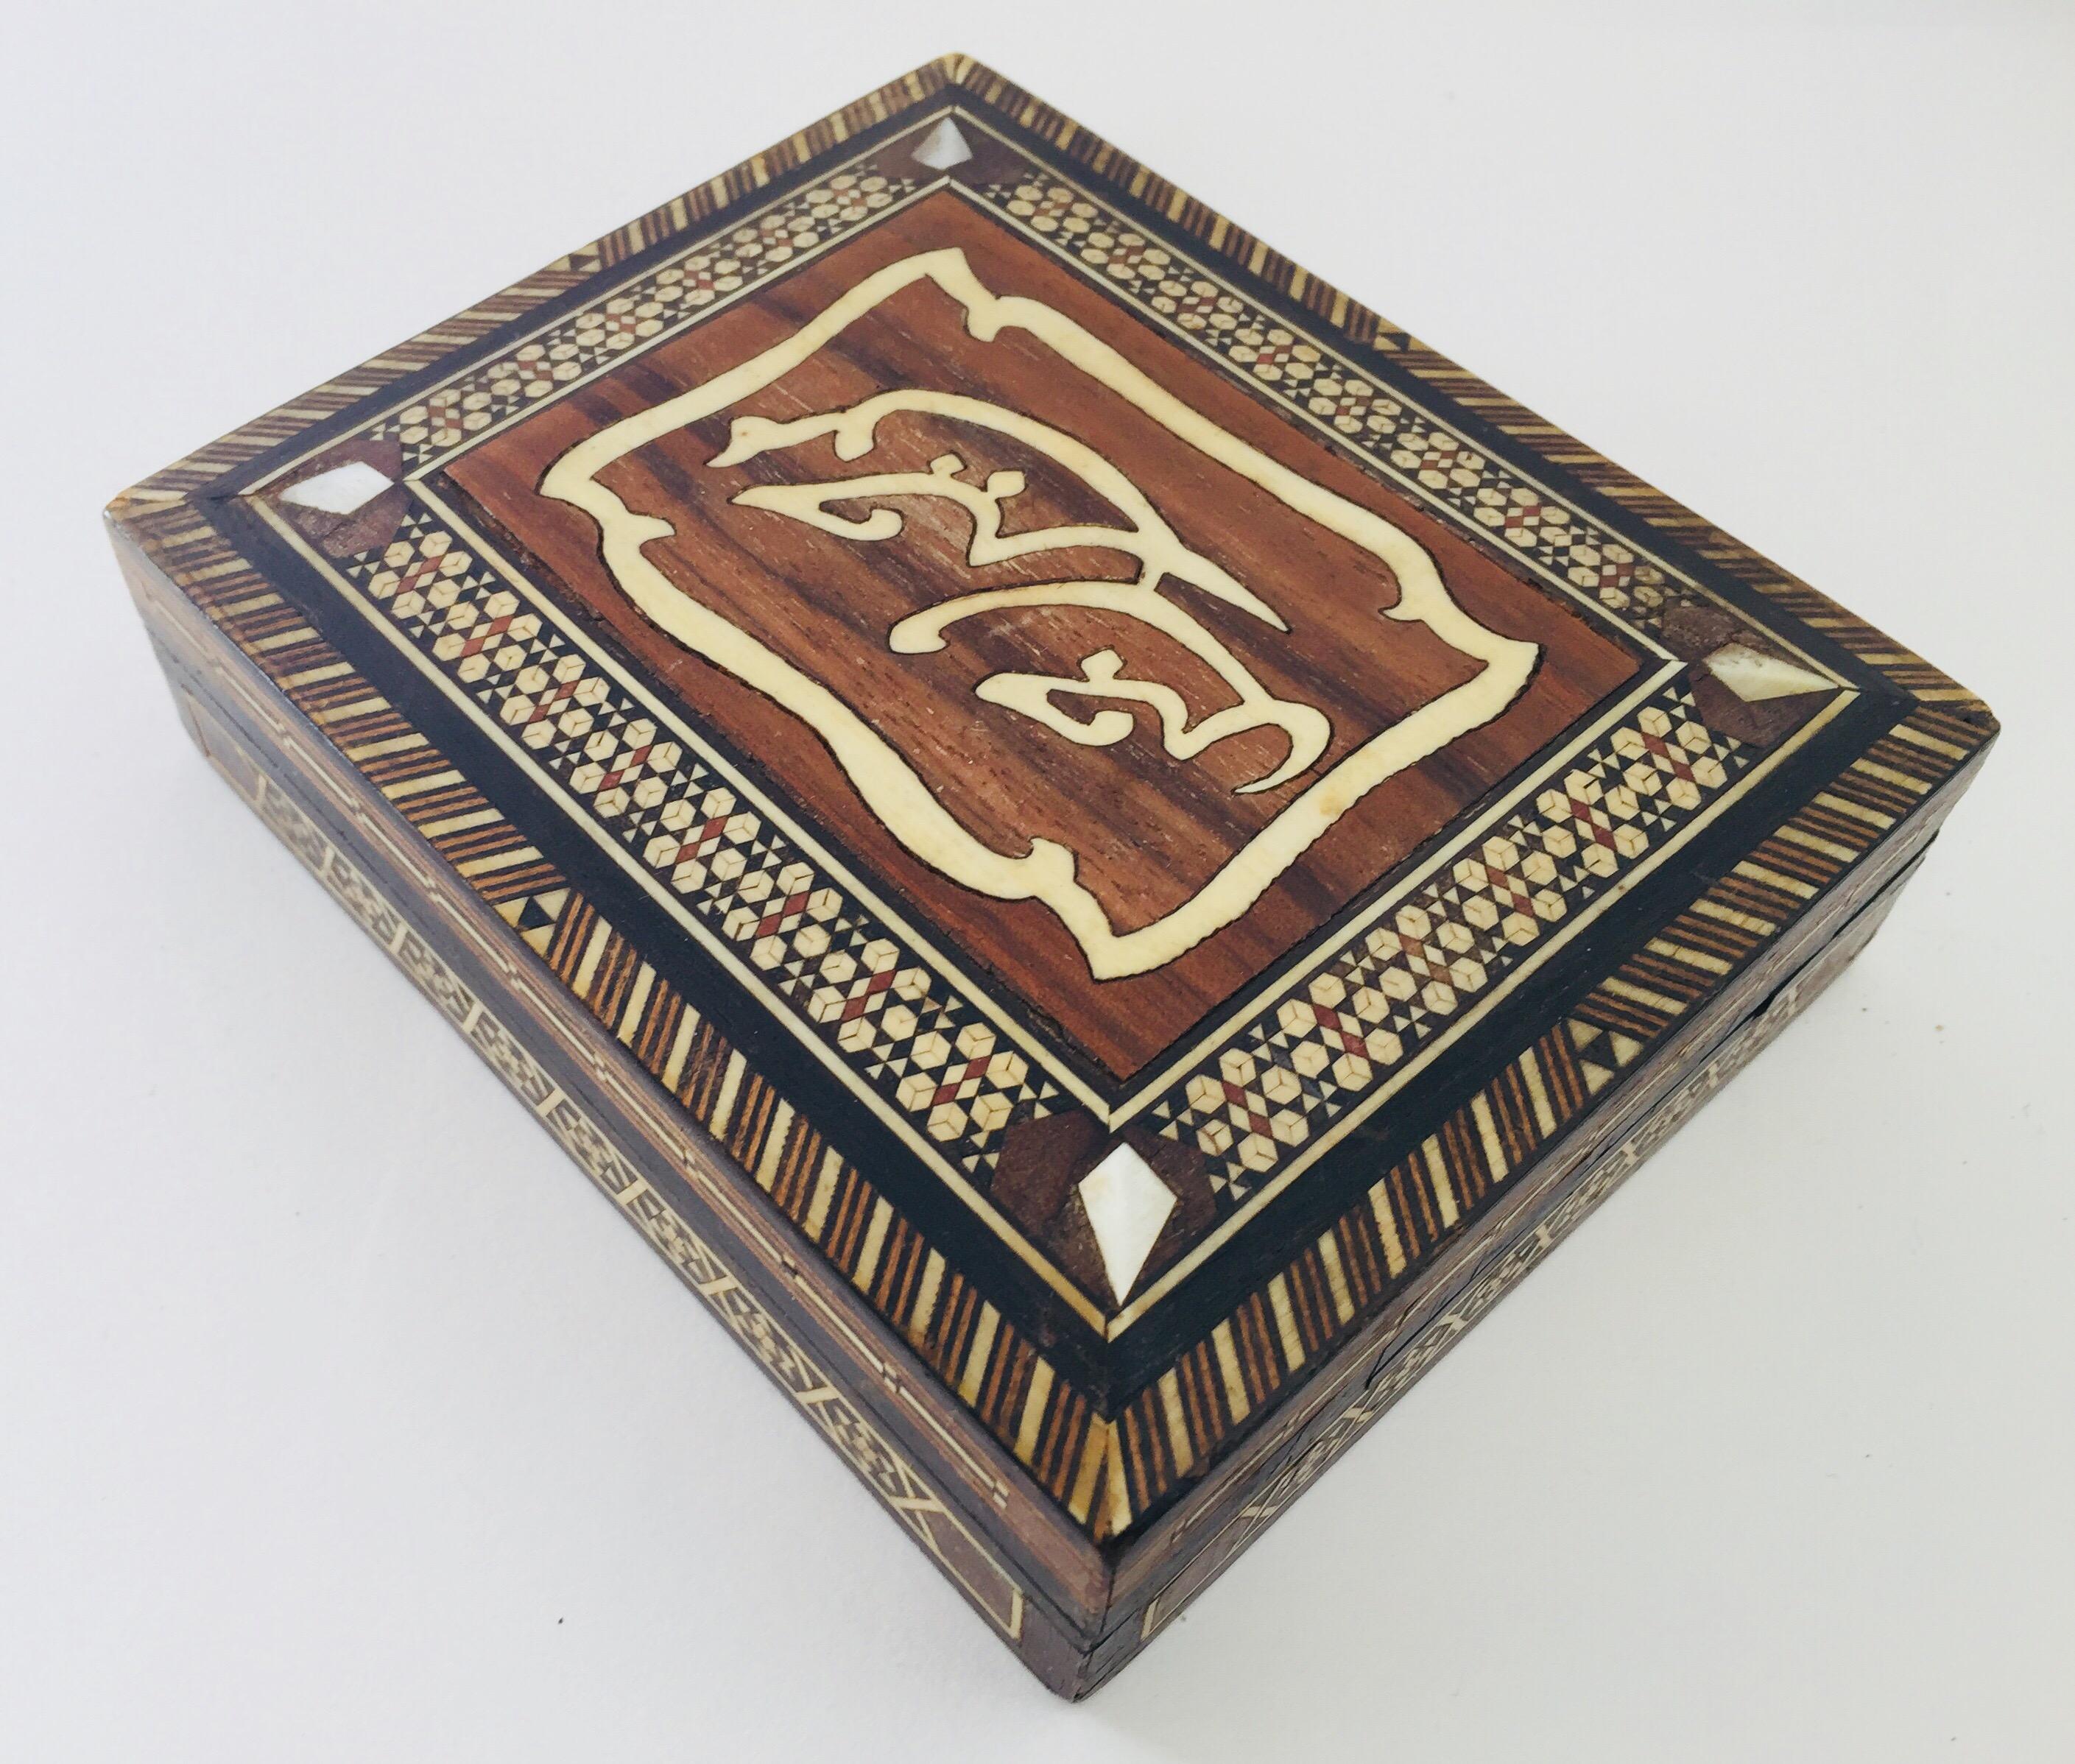 Syrian Inlaid Marquetry Mosaic Wooden Box 2